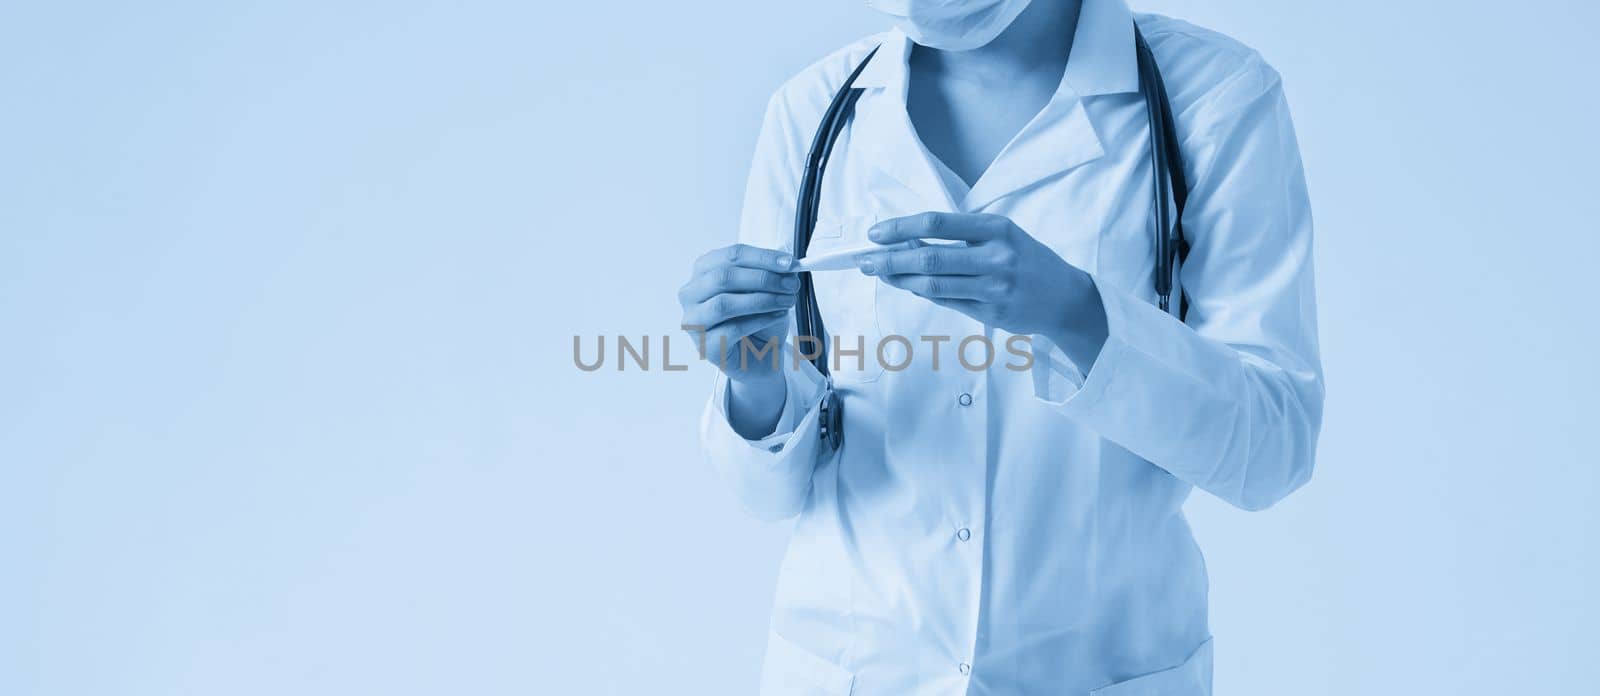 Doctor looking at measurement on medical thermometer